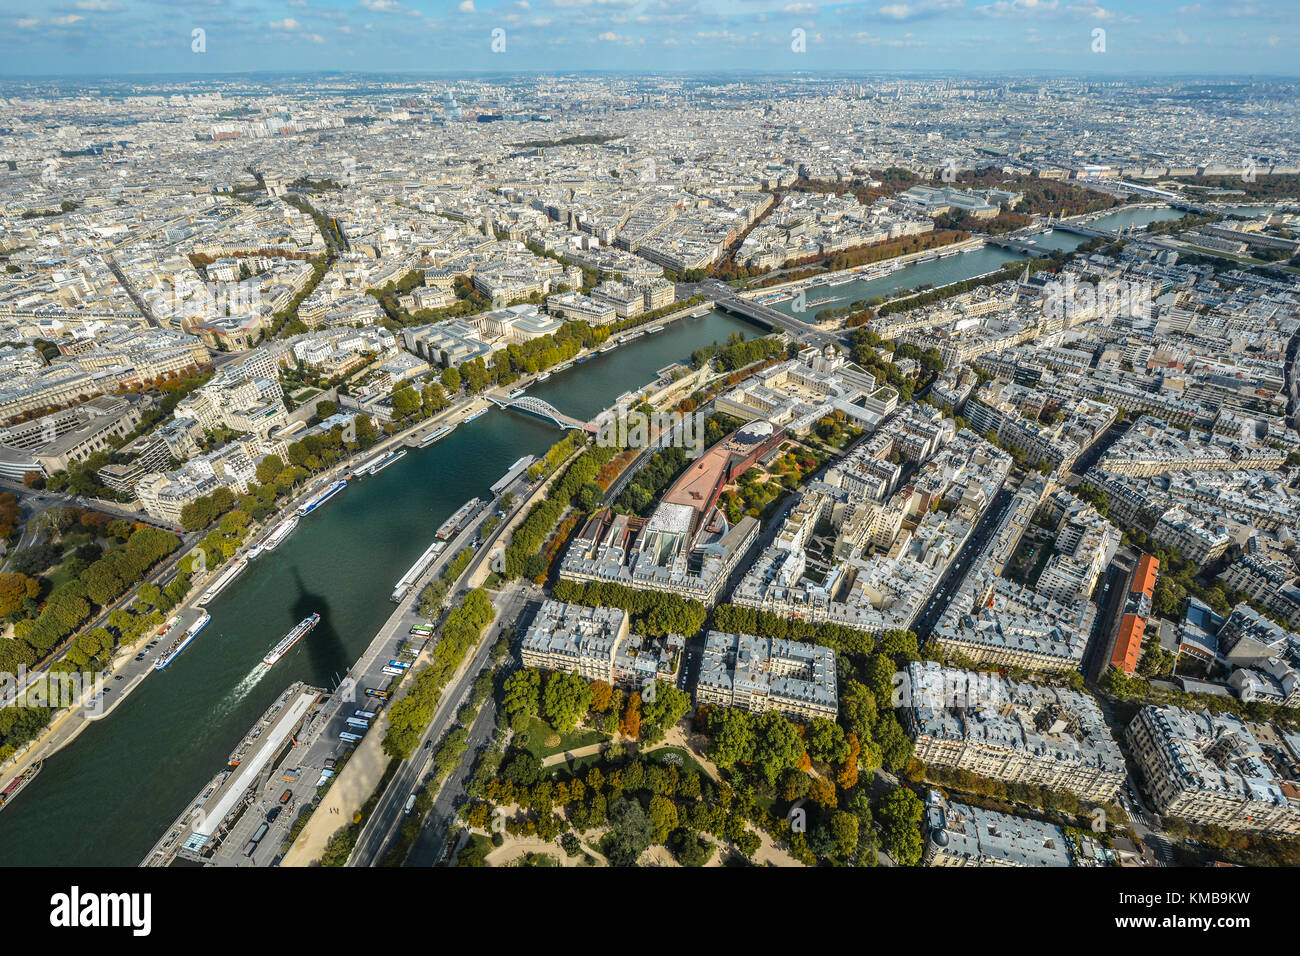 View of the city of Paris on a sunny day in early autumn from the 3rd, top level of the Eiffel Tower Stock Photo